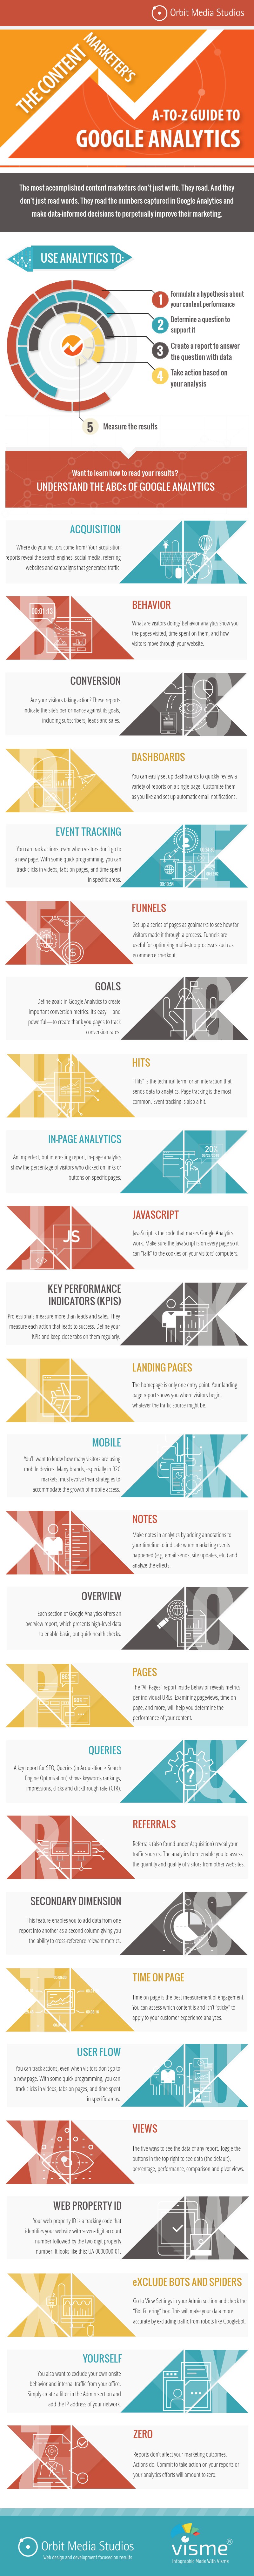 The A-to-Z of Google Analytics for Content Marketers Infographic